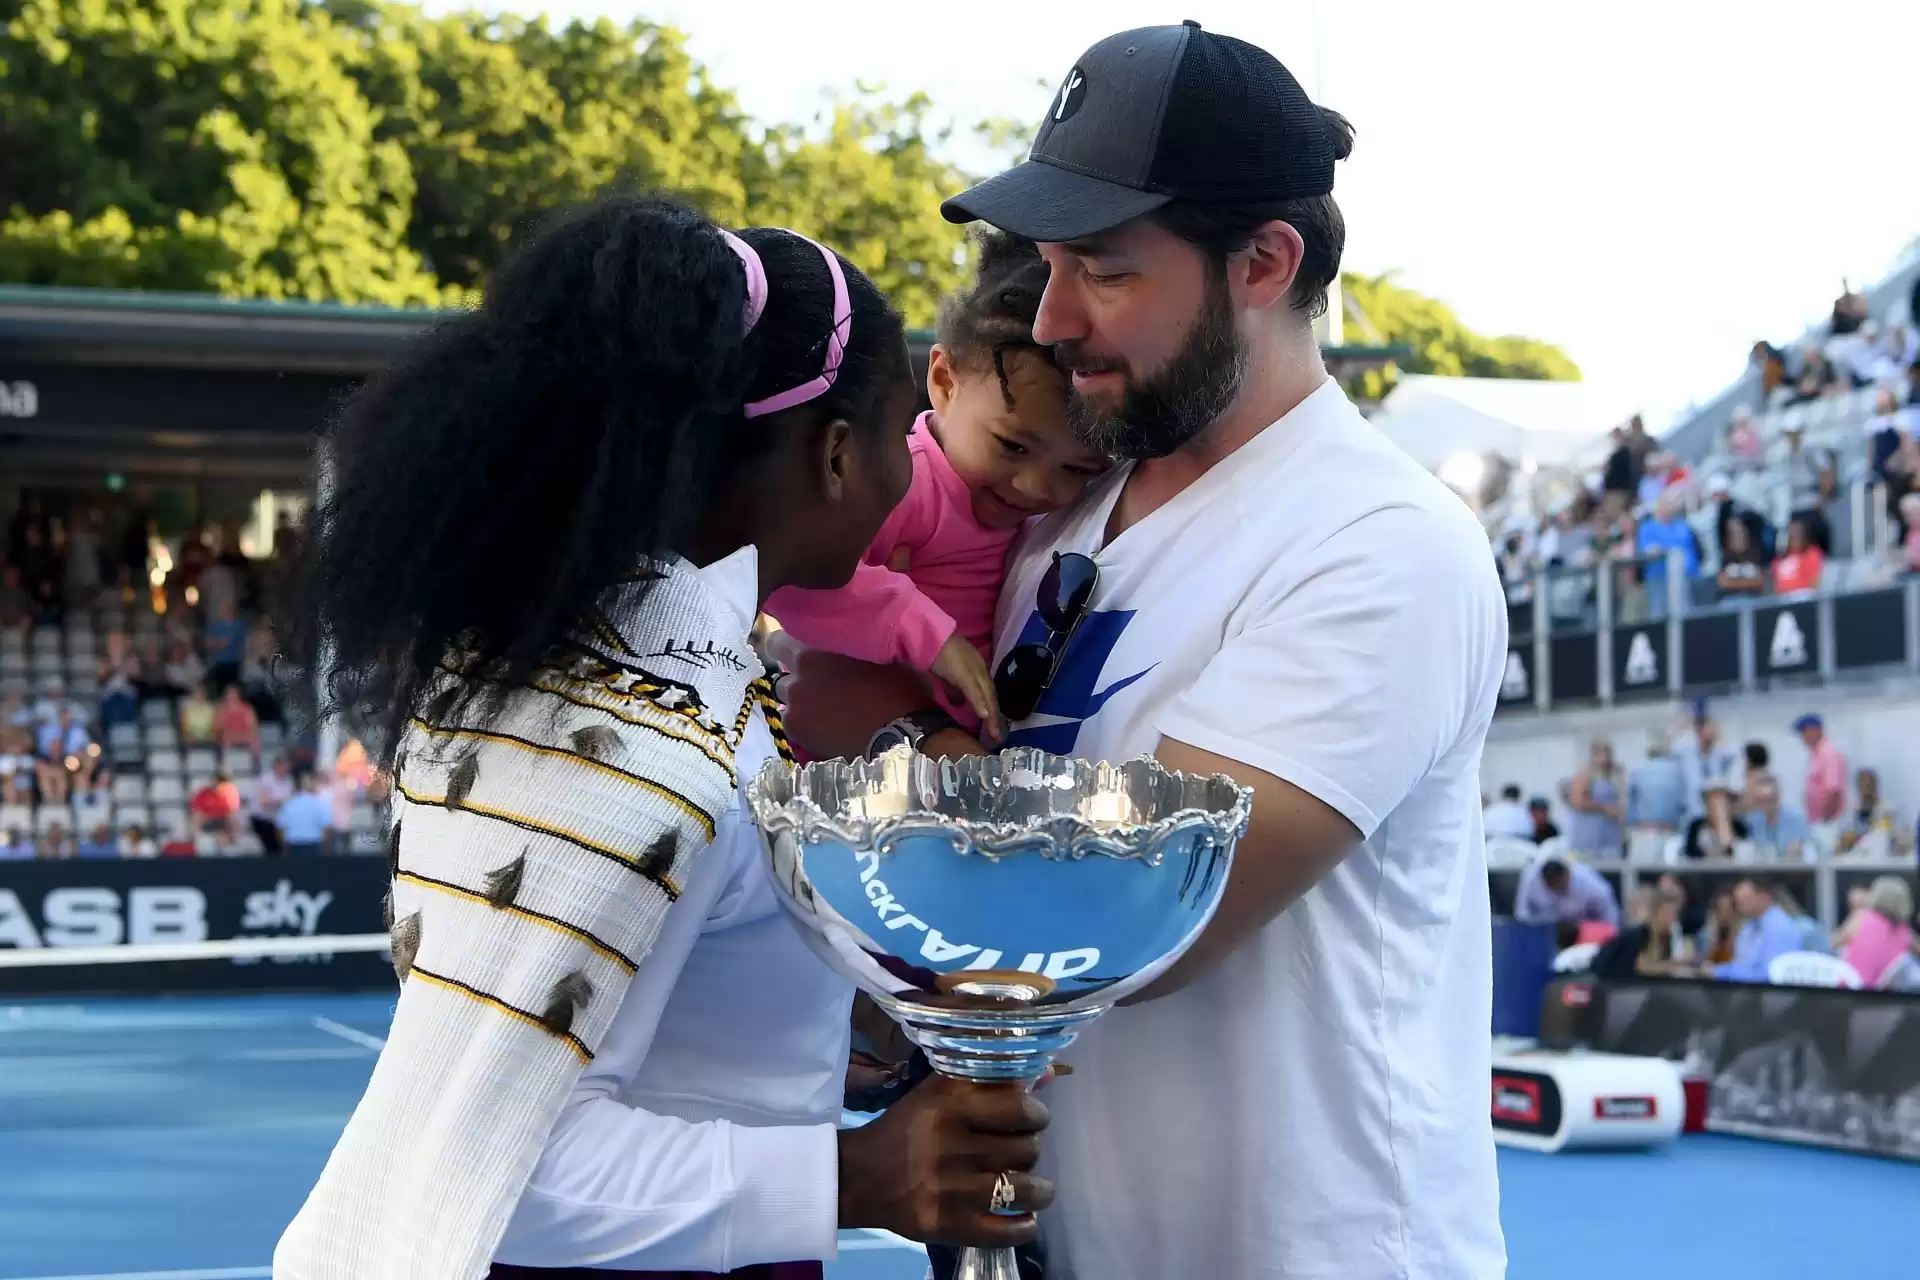 Serena Williams and Alexis Ohanian's Second Child Adira River's Photoshoot: Tennis Fans React with 